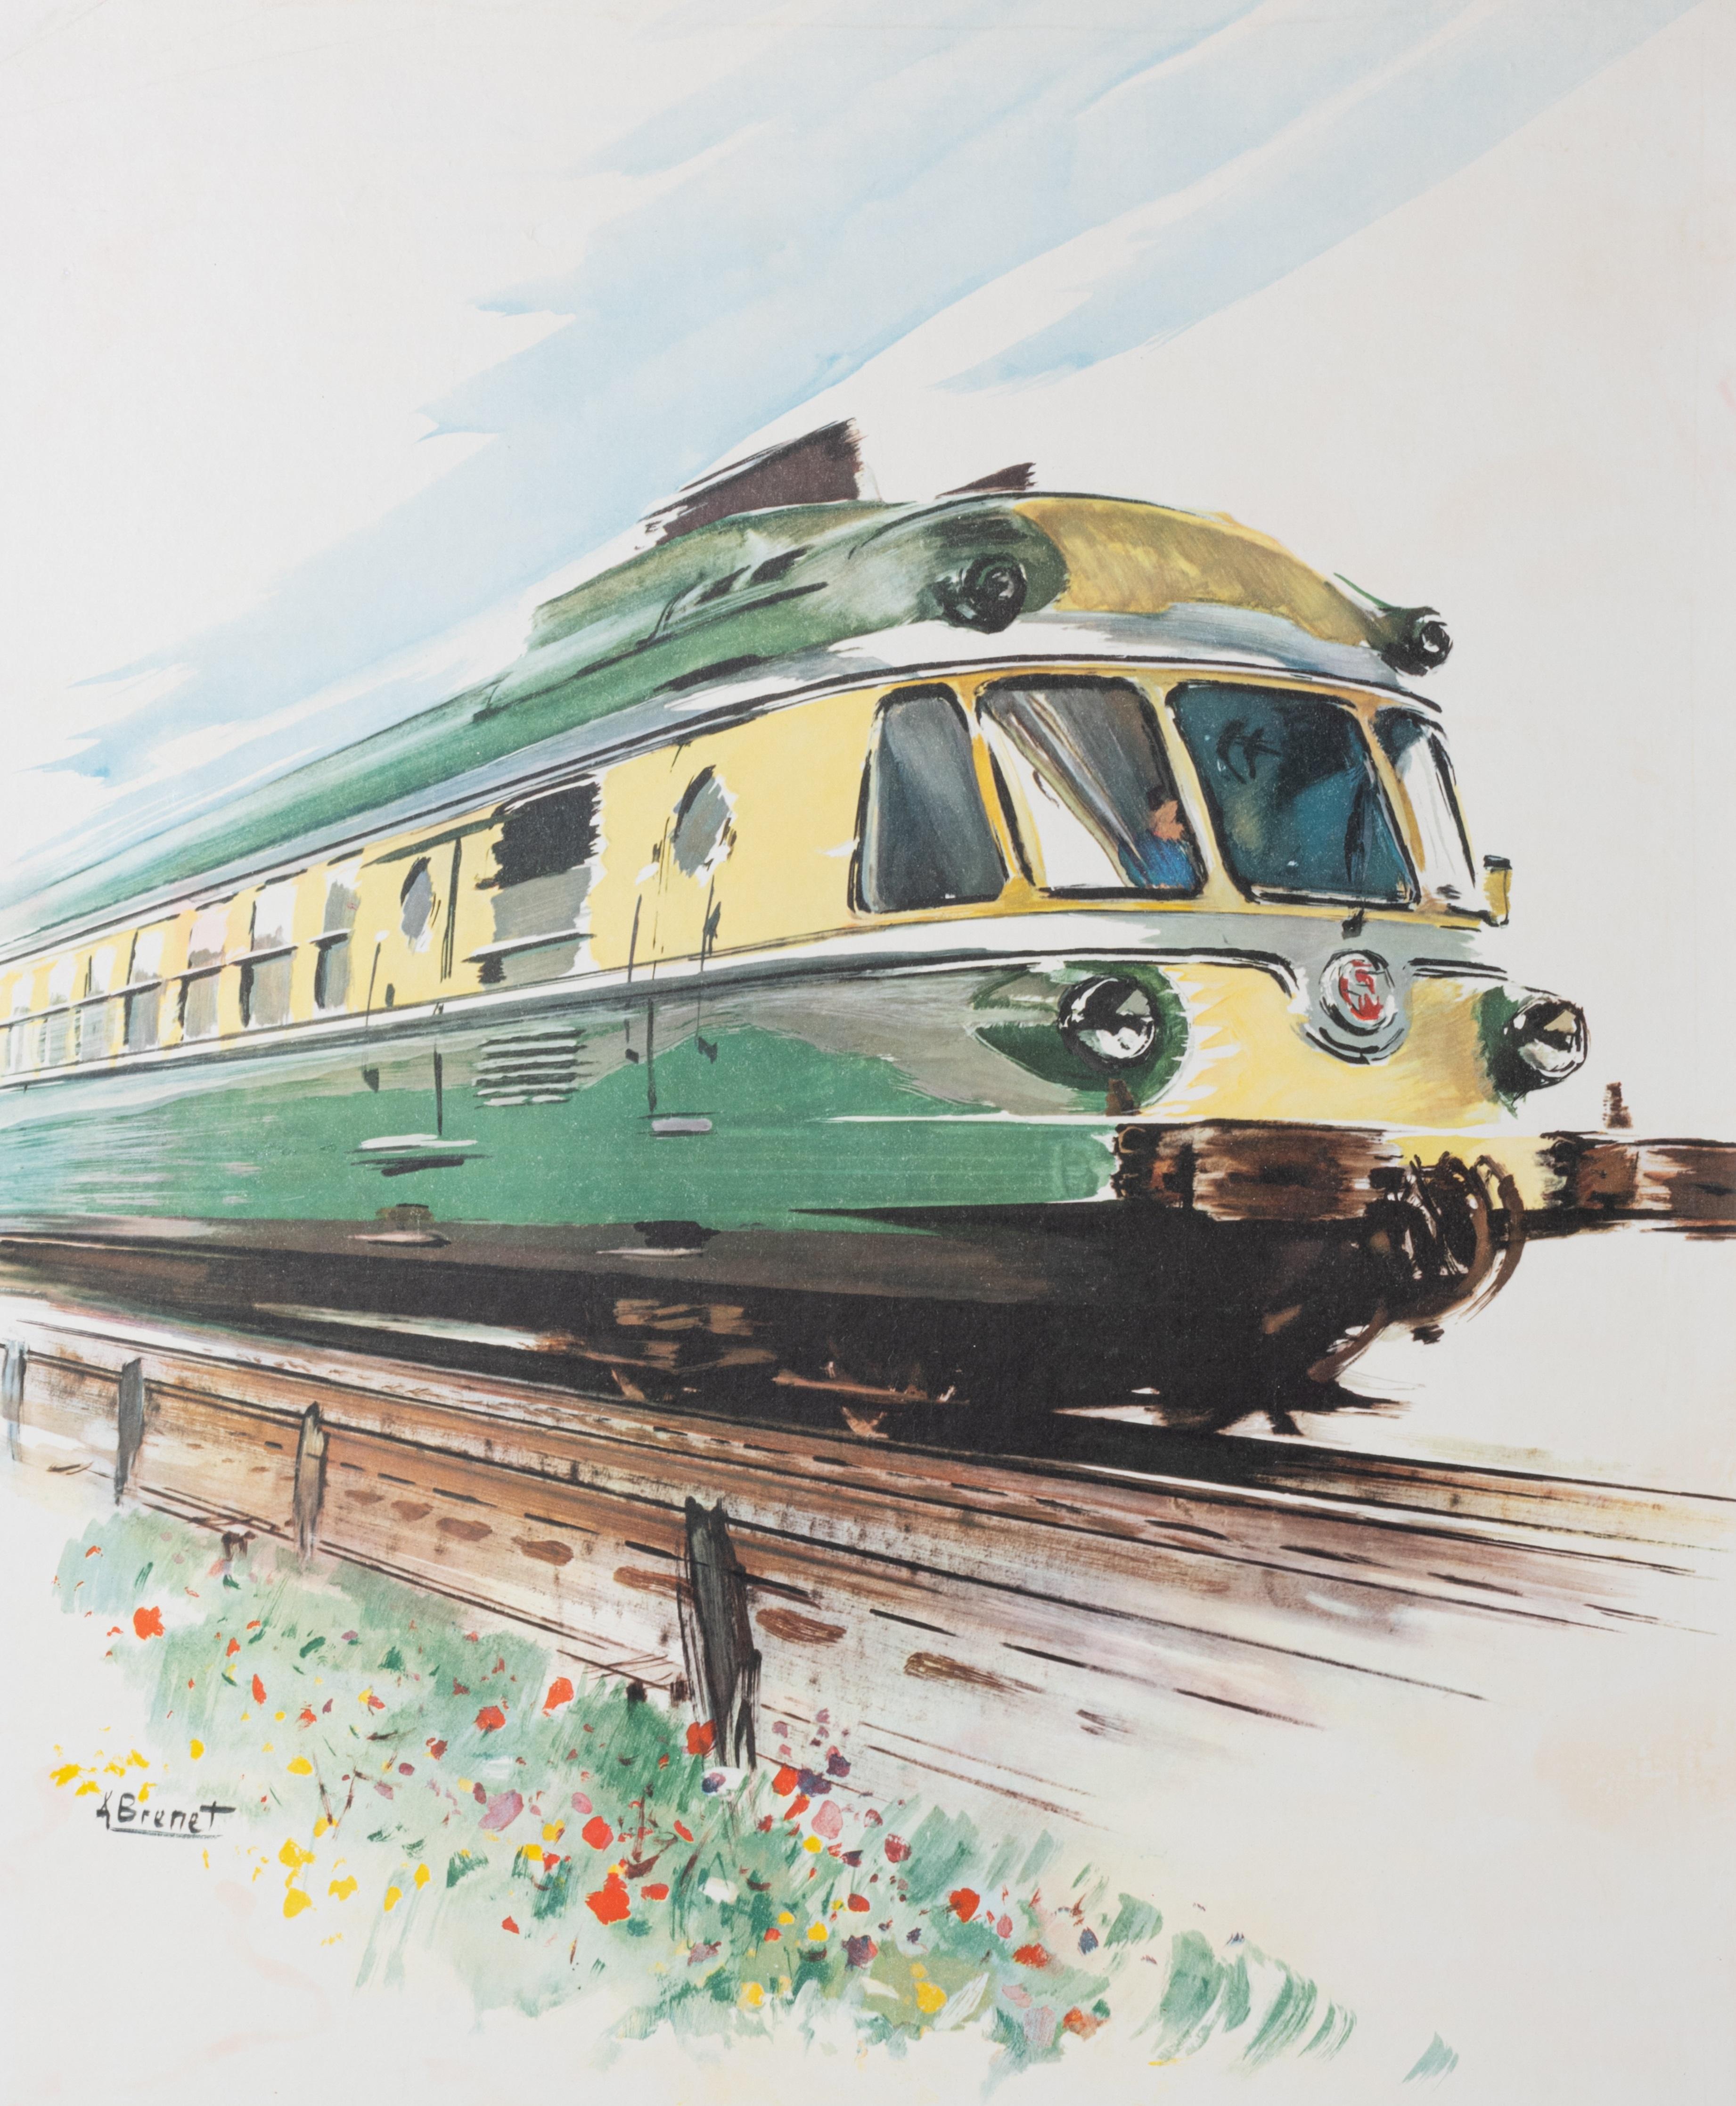 This poster from the French Railways was produced in 1958 by Albert Brenet to promote rail tourism in France.

Artist : Albert Brenet (1903 - 2005)
Title : Societe Nationale des Chemins de Fer Français – Vitesse – Exactitude - Confort
Date :